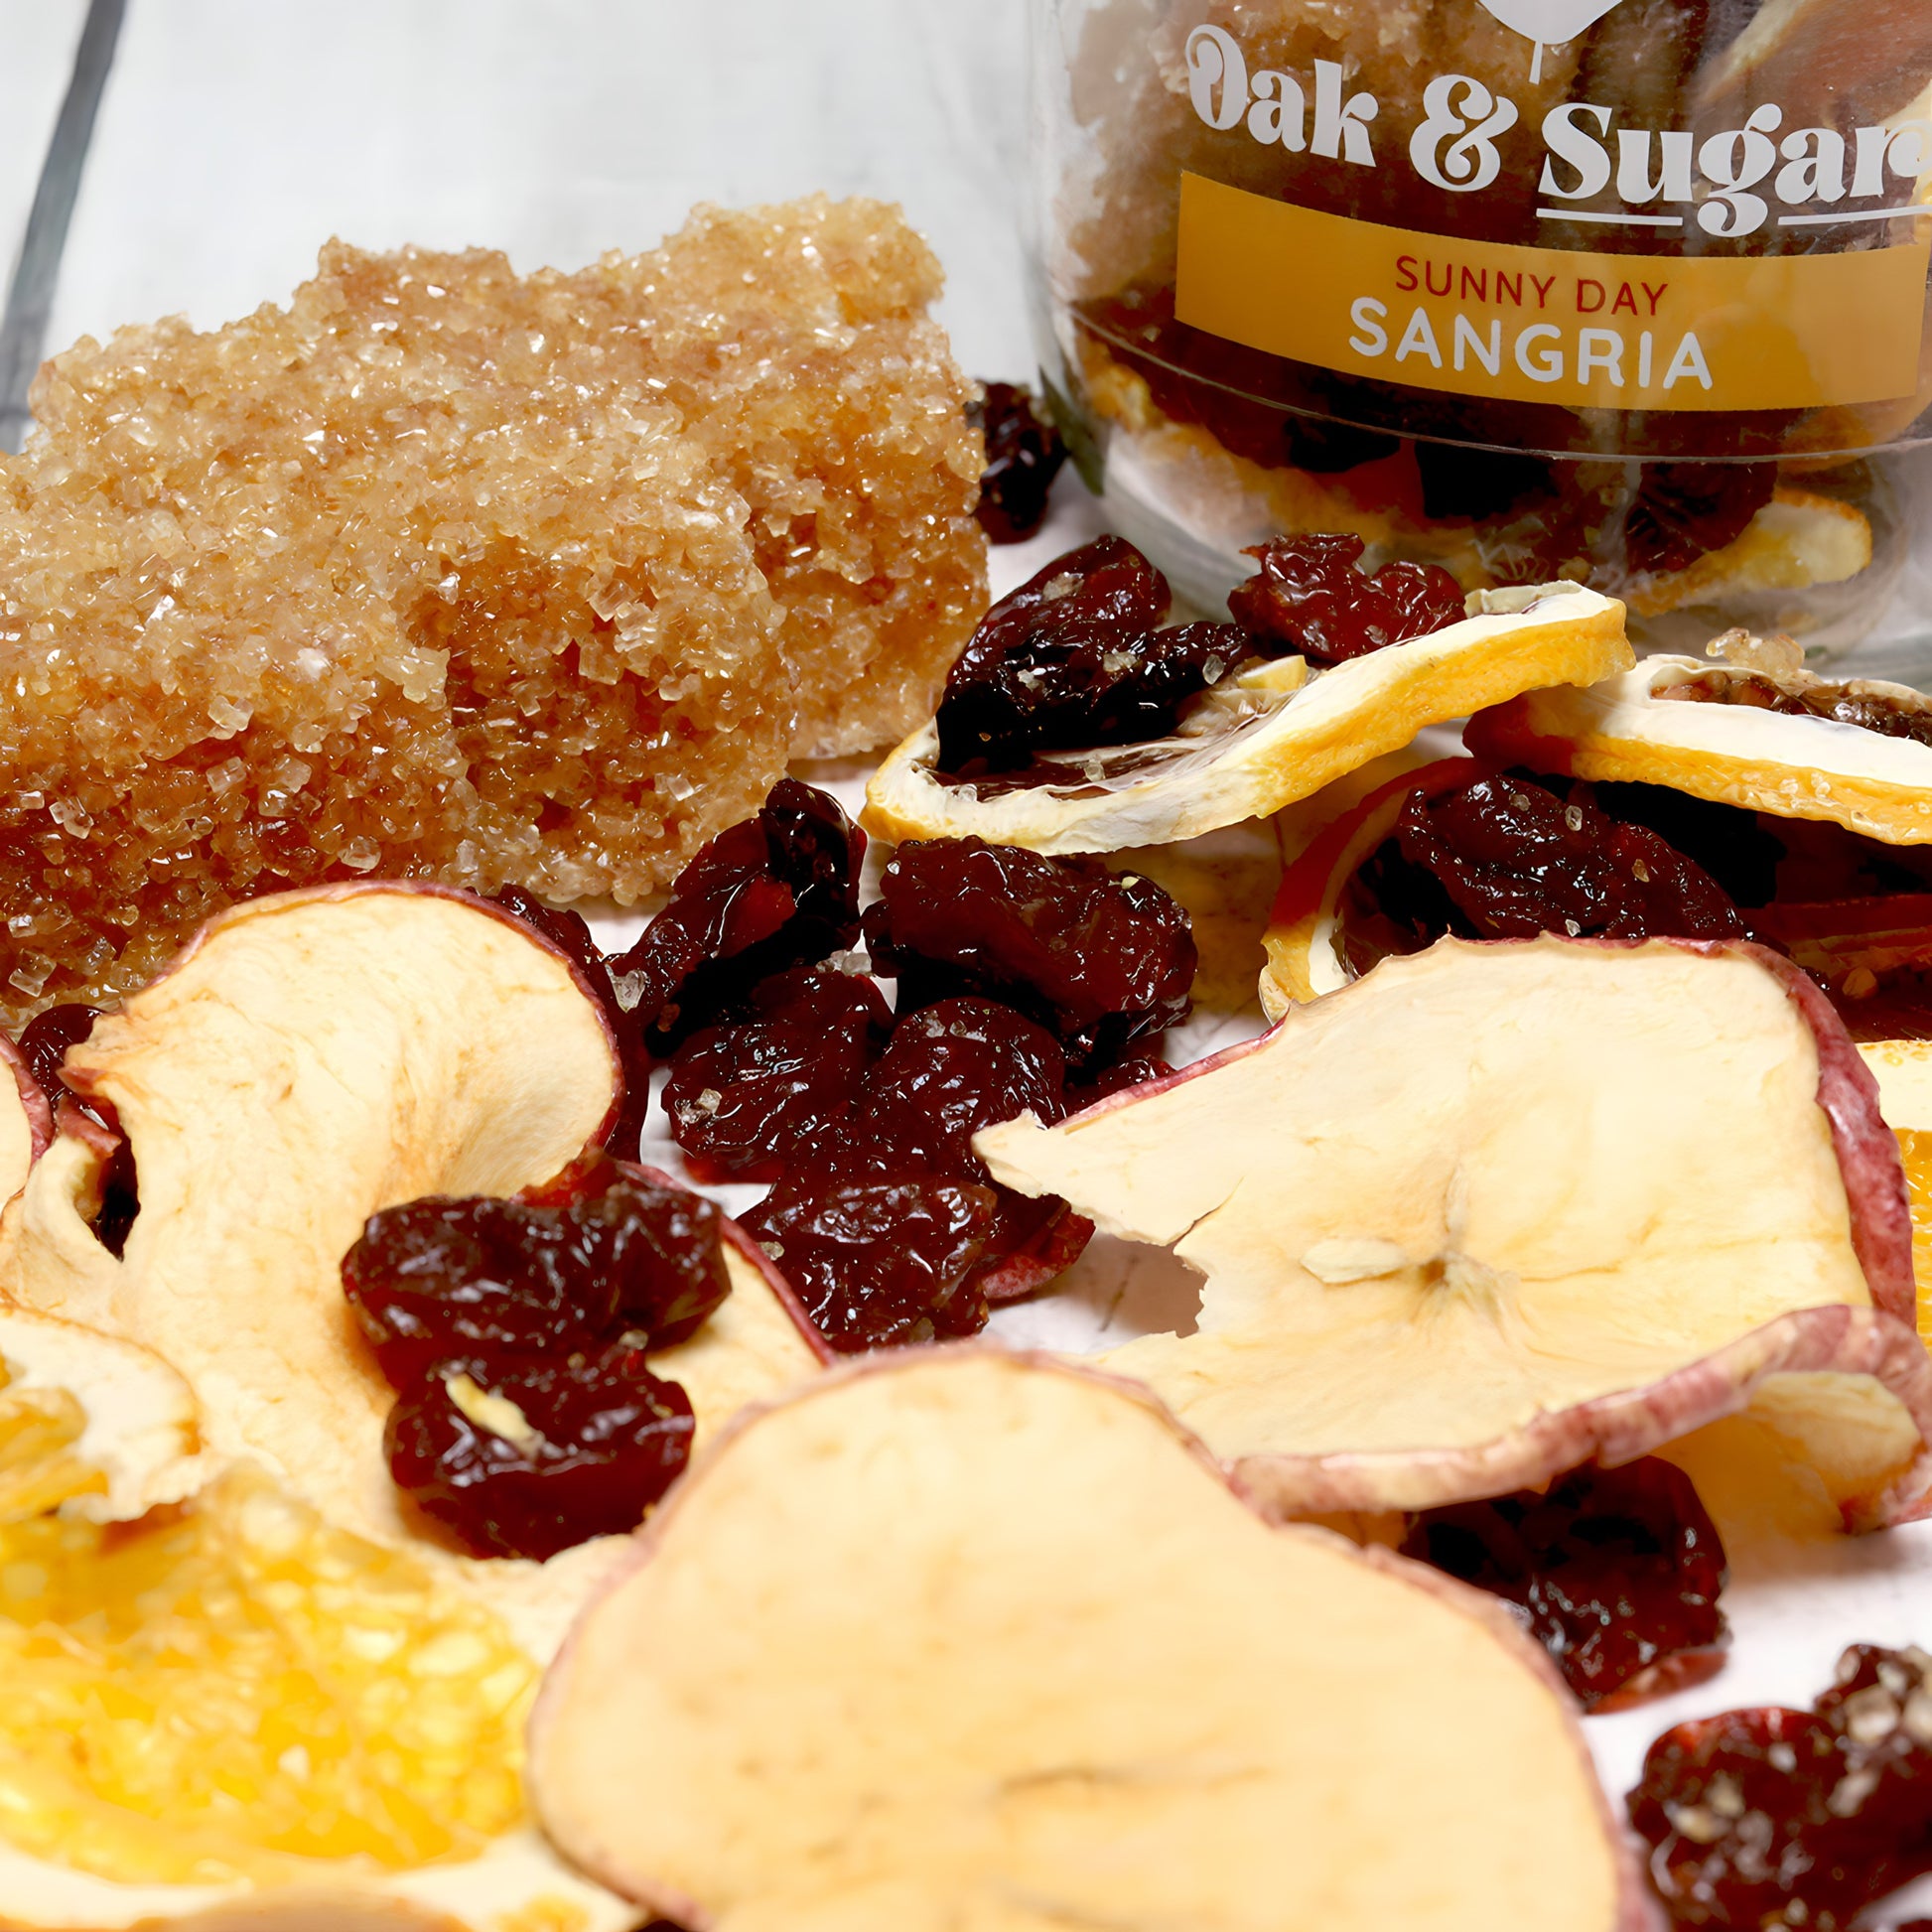 Close-up of dried apple slices, cranberries, and other mixed dried fruits scattered on a surface. A chunk of golden-brown rock sugar sits at the back. On the right, a clear plastic container labeled "Oak & Sugar: Sunny Day Sangria Cocktail Infusion Kit" is partially visible, showcasing a delightful fruity blend.